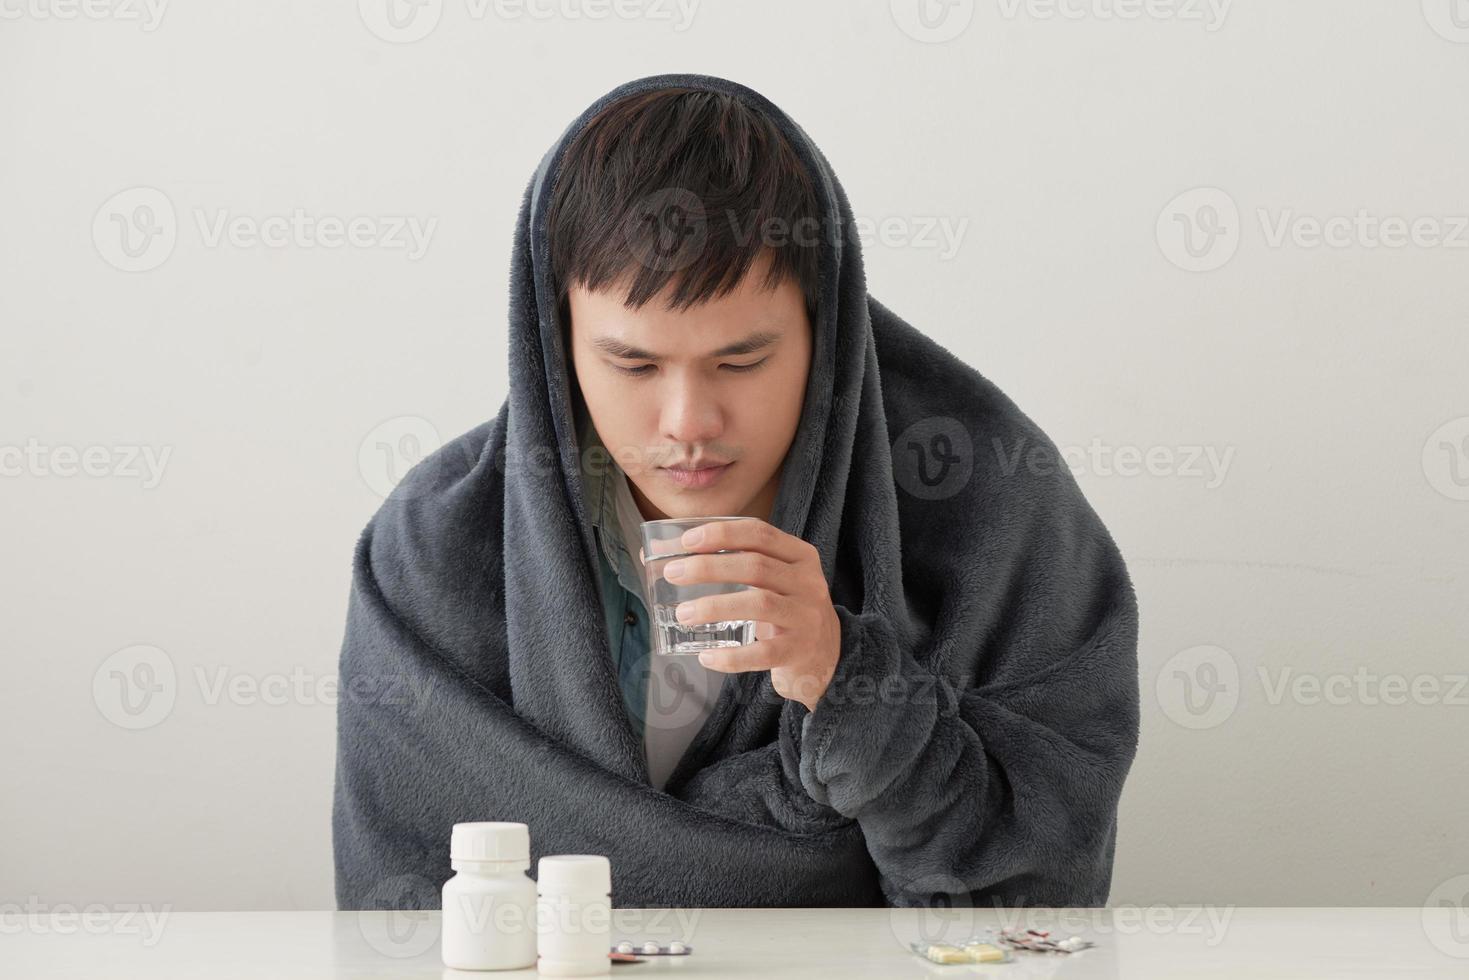 a man wrapped in a warm blanket basks on a light background photo